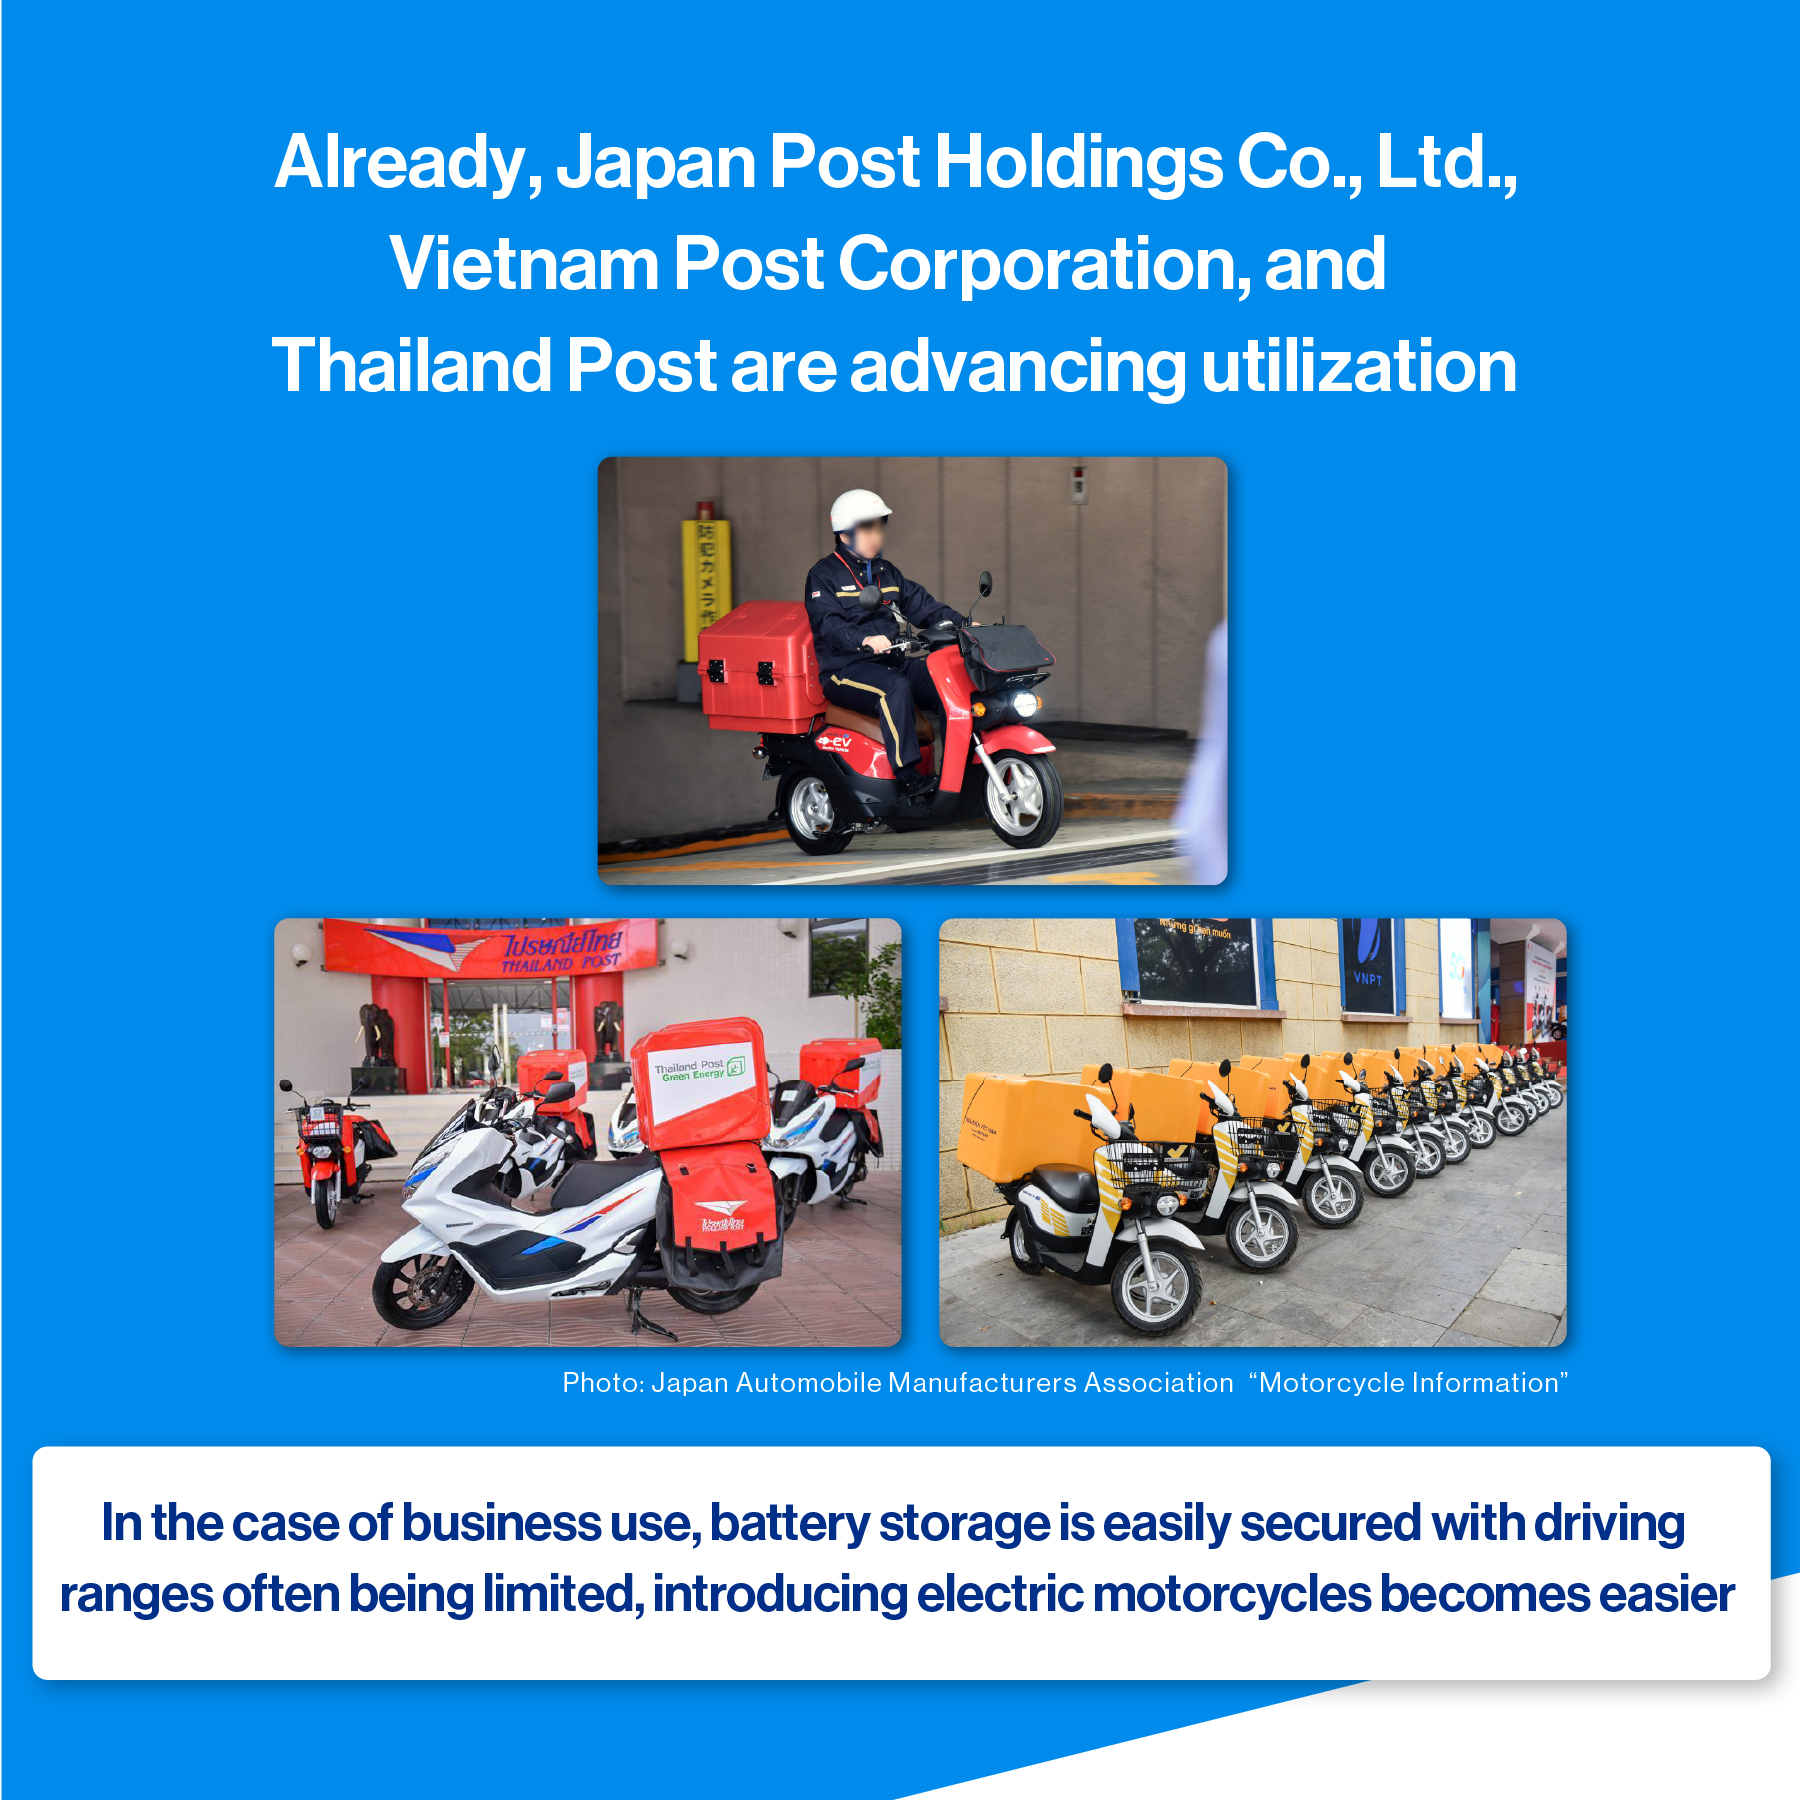 The &quot;Honda e: Business Bike&quot; series is utilized by Japan Post Holdings Co., Ltd., Vietnam Post Corporation, and Thailand Post